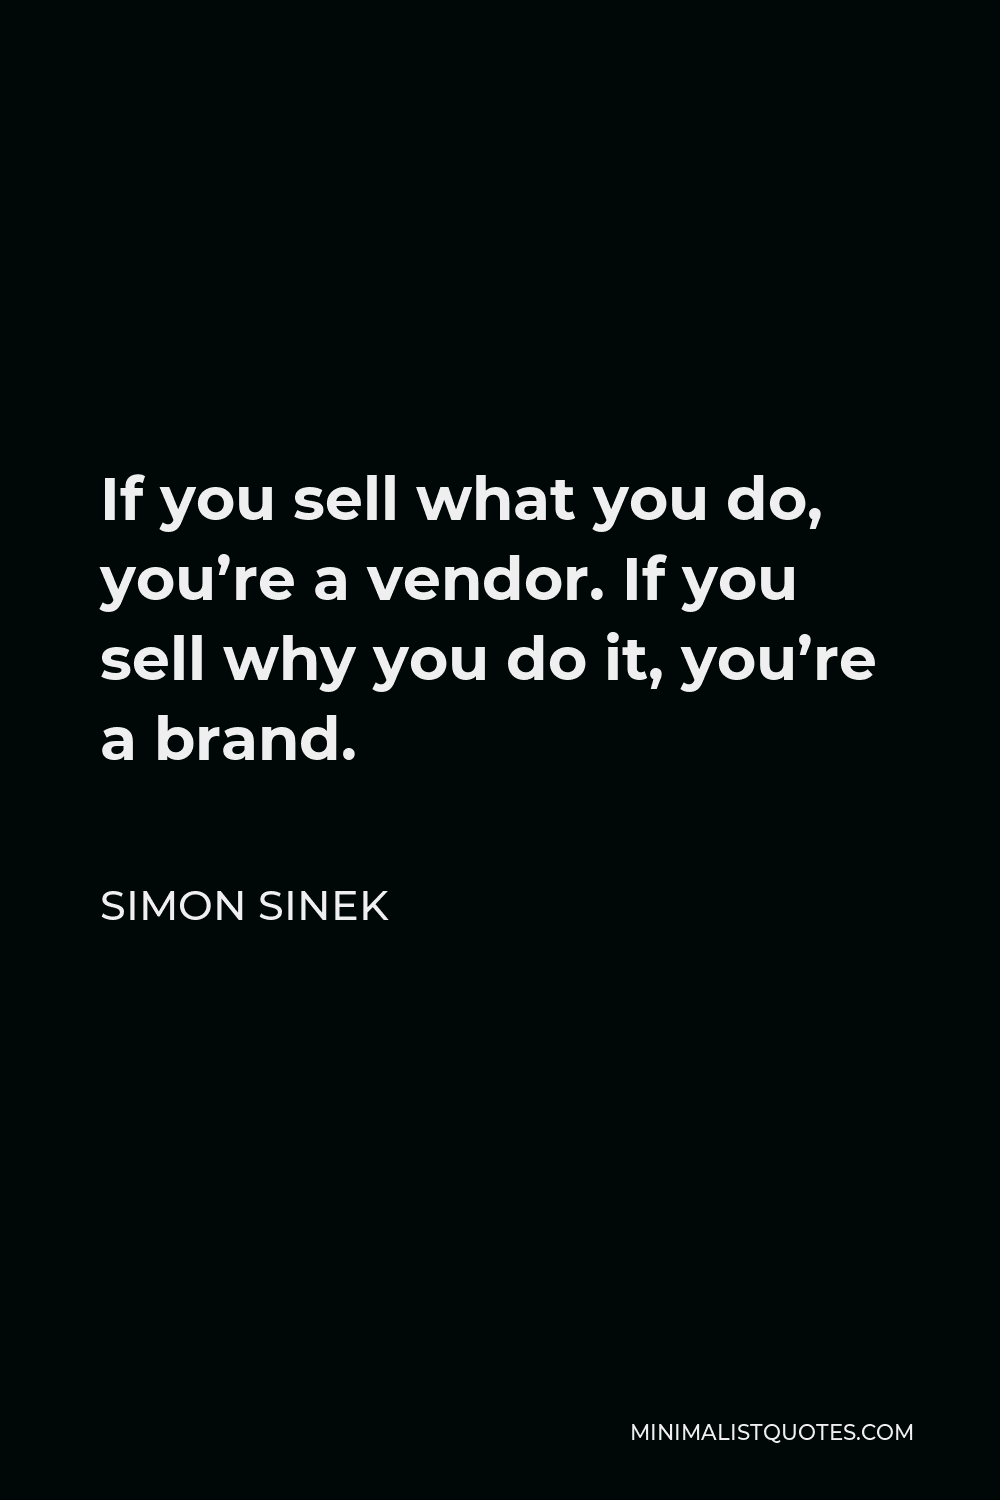 Simon Sinek Quote - If you sell what you do, you’re a vendor. If you sell why you do it, you’re a brand.